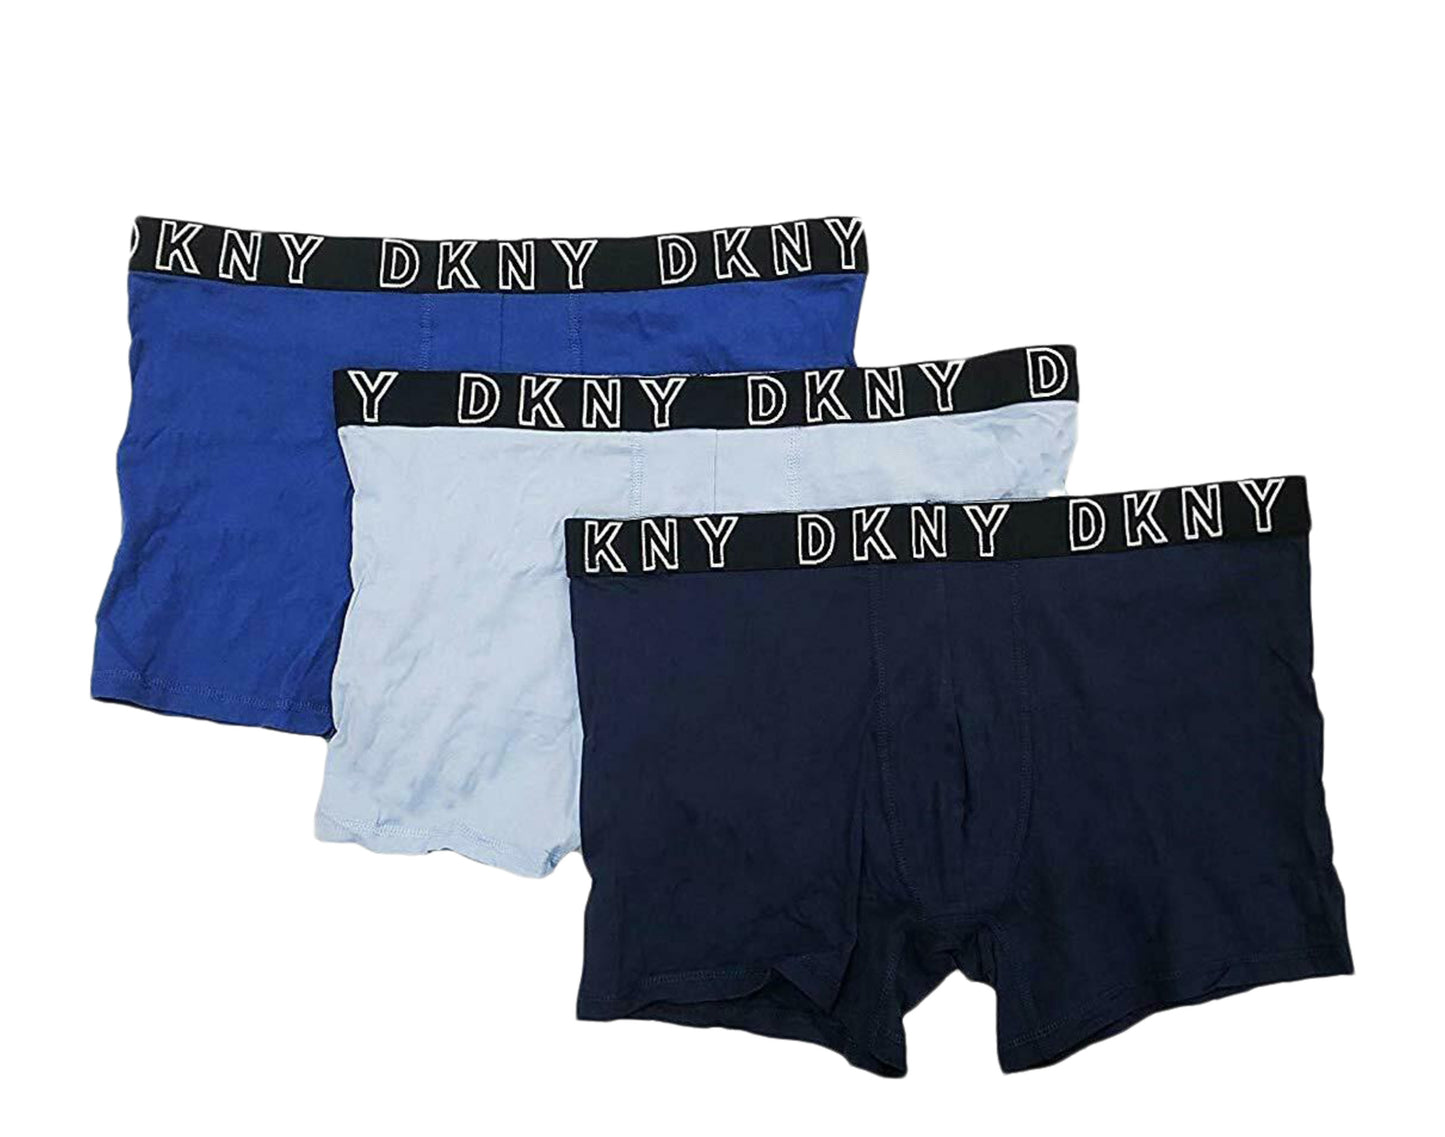 DKNY Cotton Stretch Boxer Briefs Navy/Blue/Chambray Underwear (3 Pack) 3205552401-40630